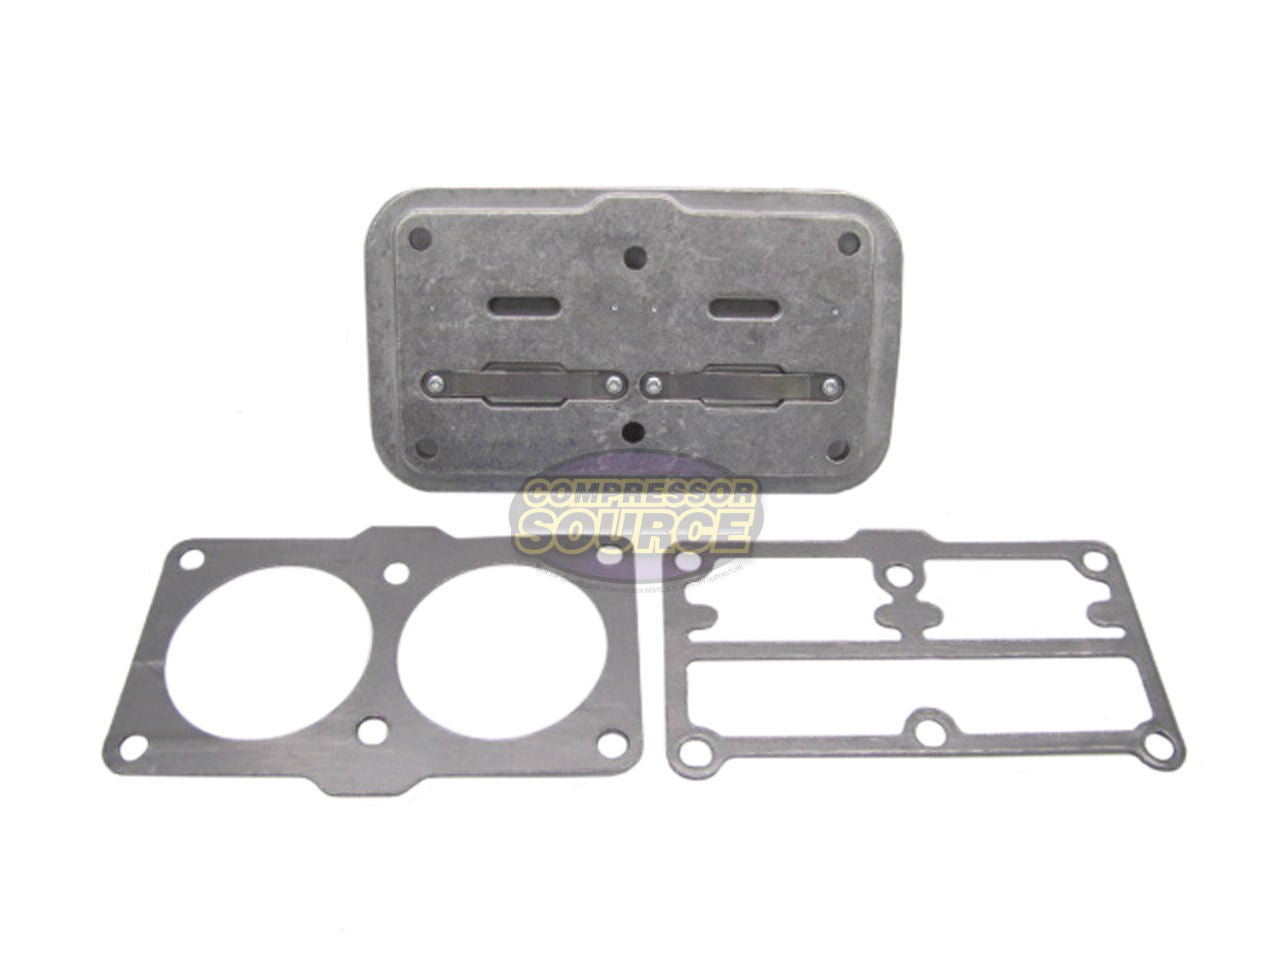 New Quincy QTS-3 Or QTS-5 Valve Plate & Gaskets Head Rebuild Kit